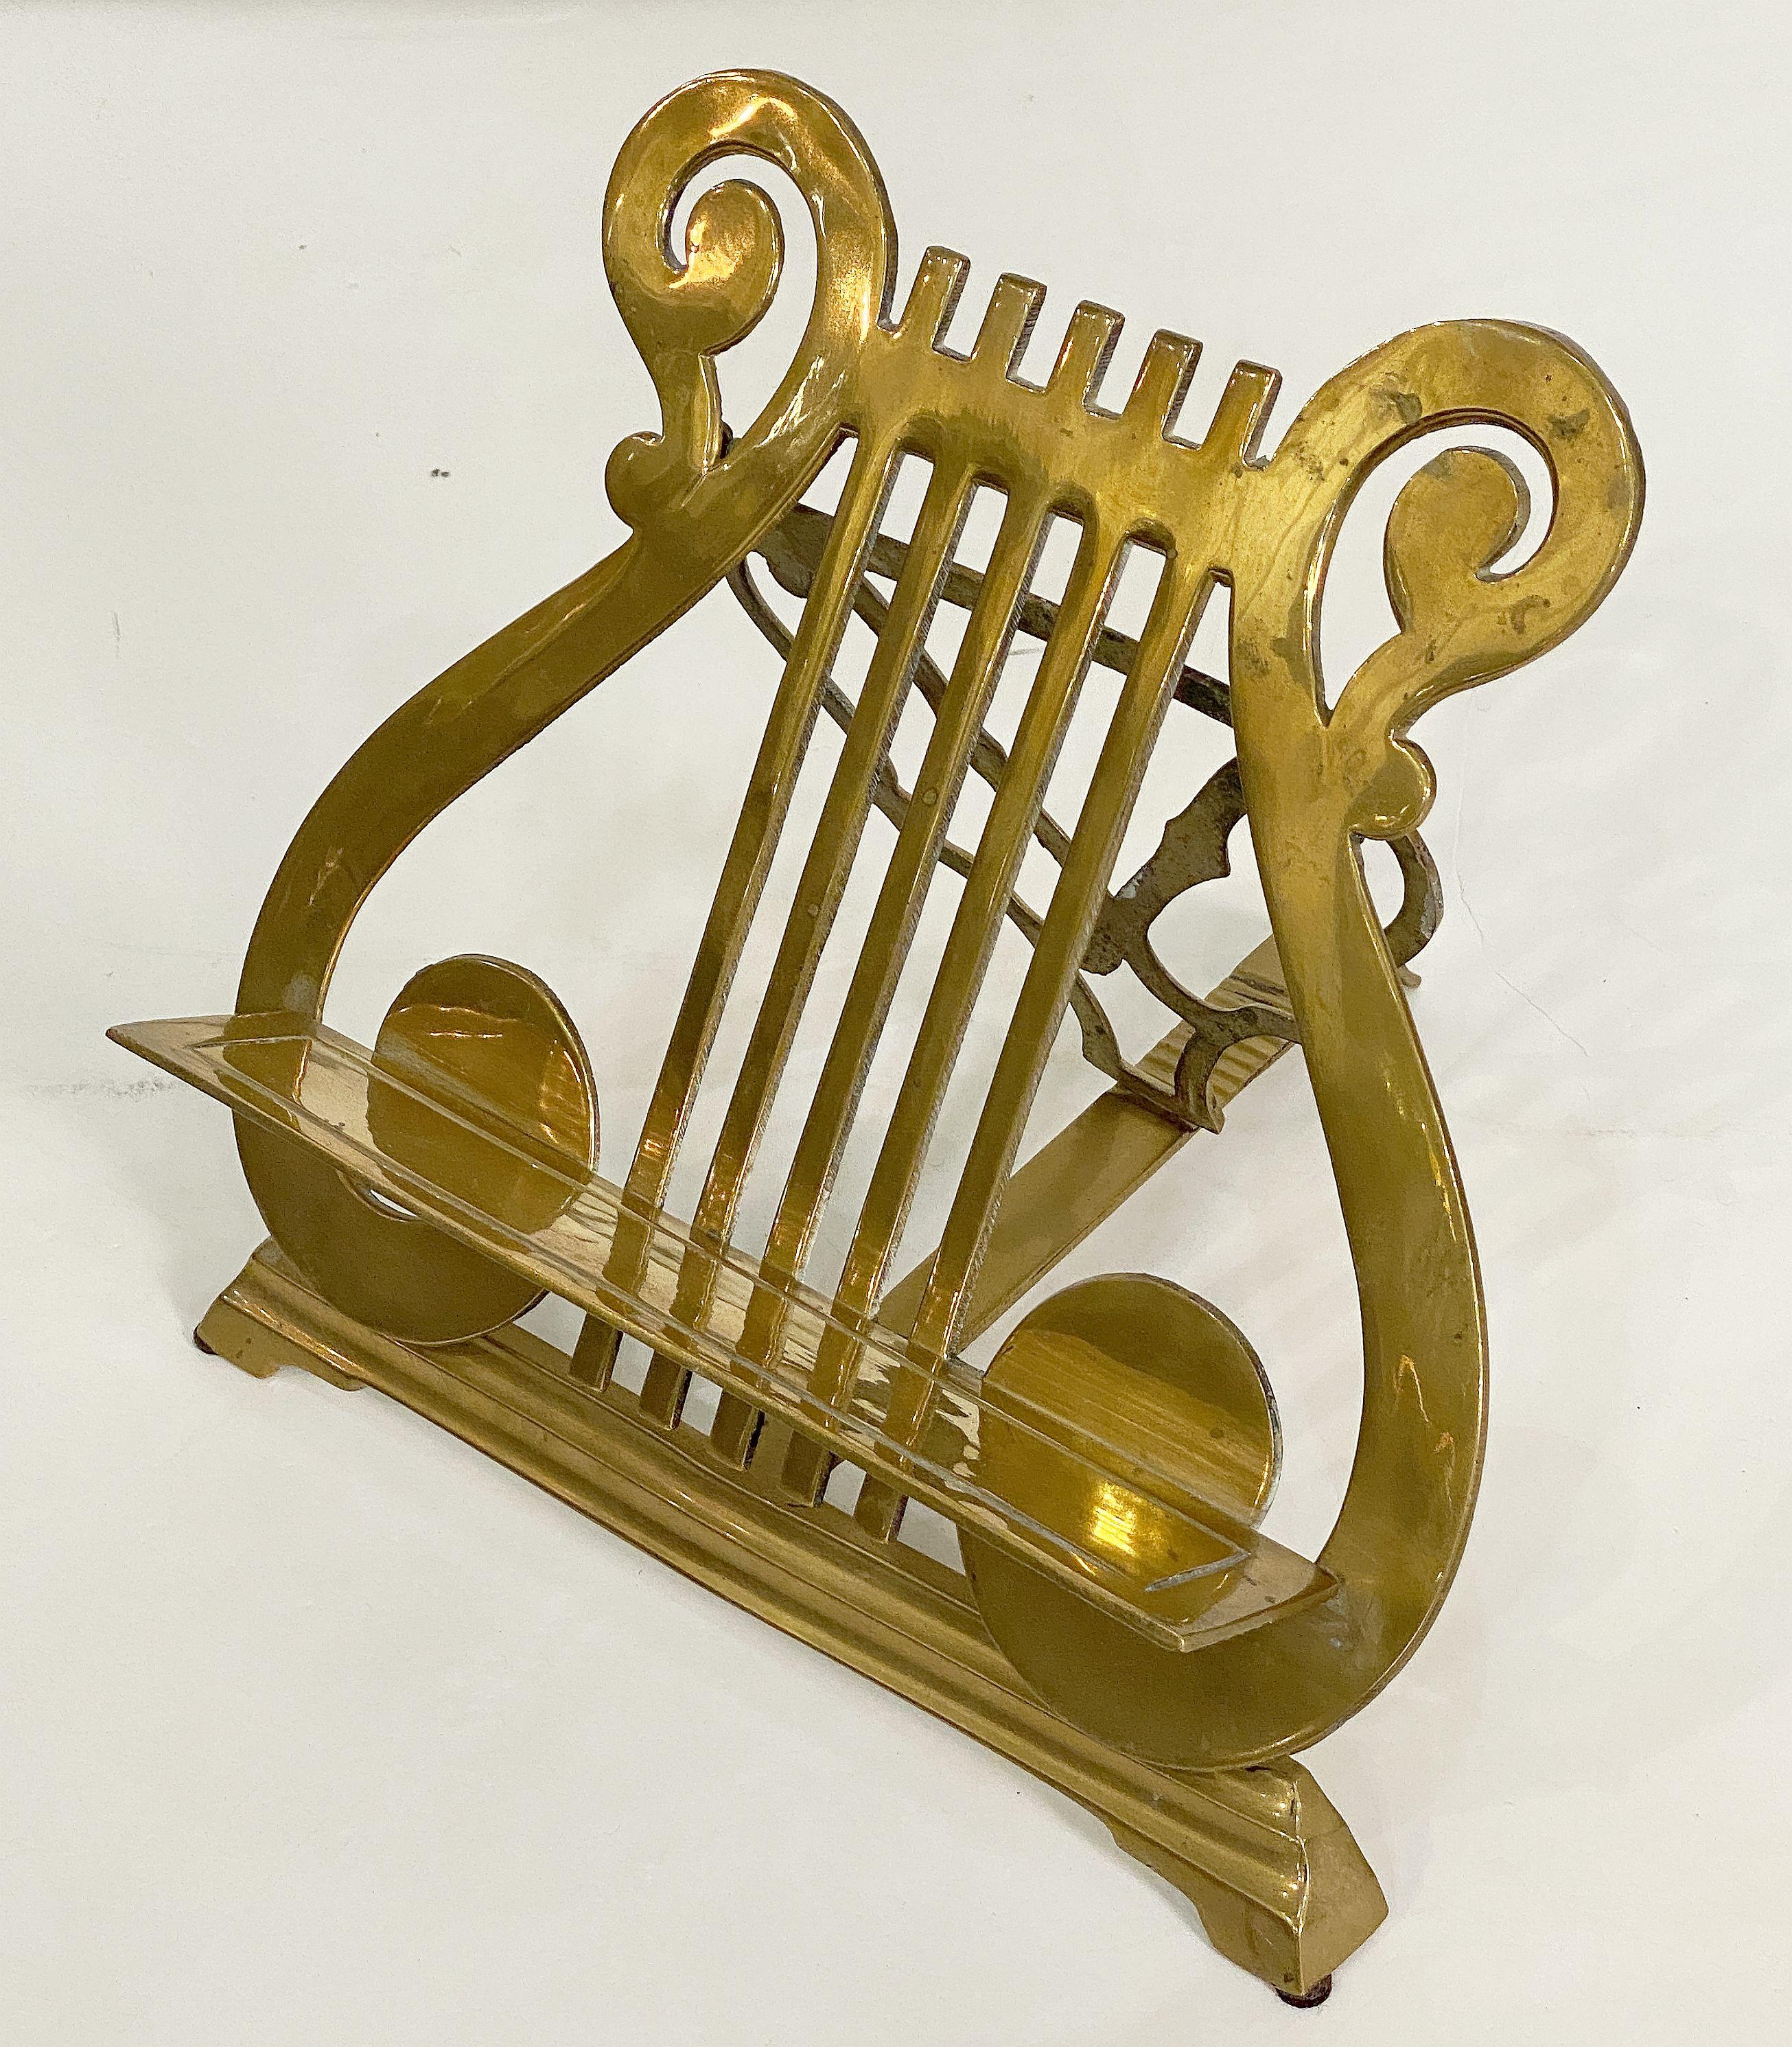 A fine English table top lectern or missal book and music stand of brass from the Edwardian era, featuring a pierced lyre-shaped reading top or back with attached book ledge. The collapsible back attached to a graduated, adjustable base.

Suitable